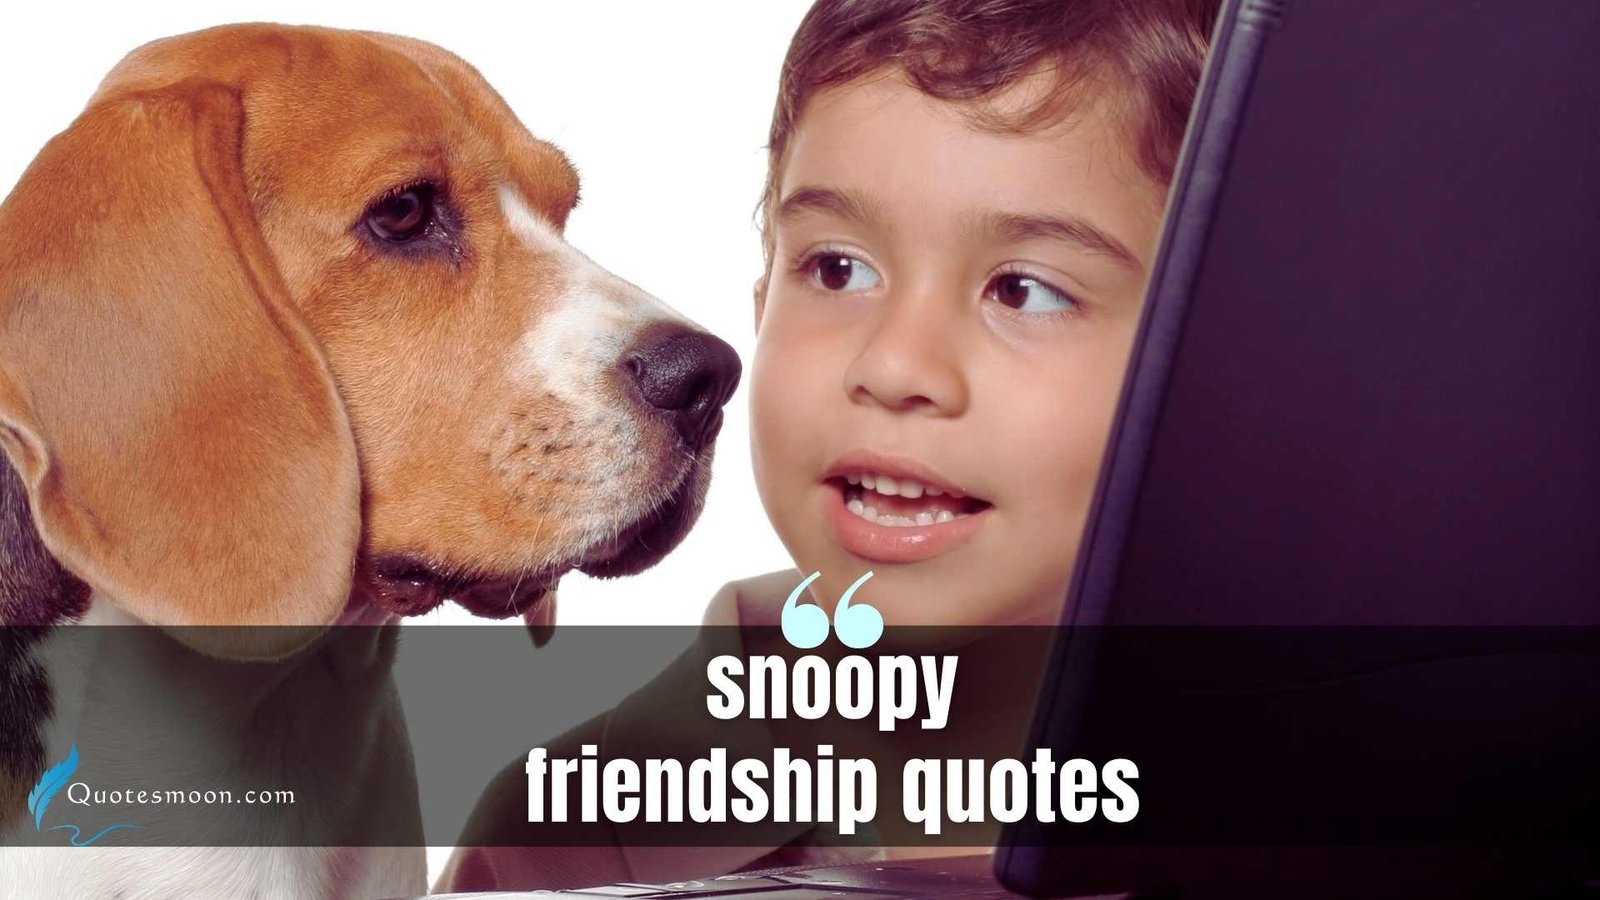 snoopy friendship quotes images